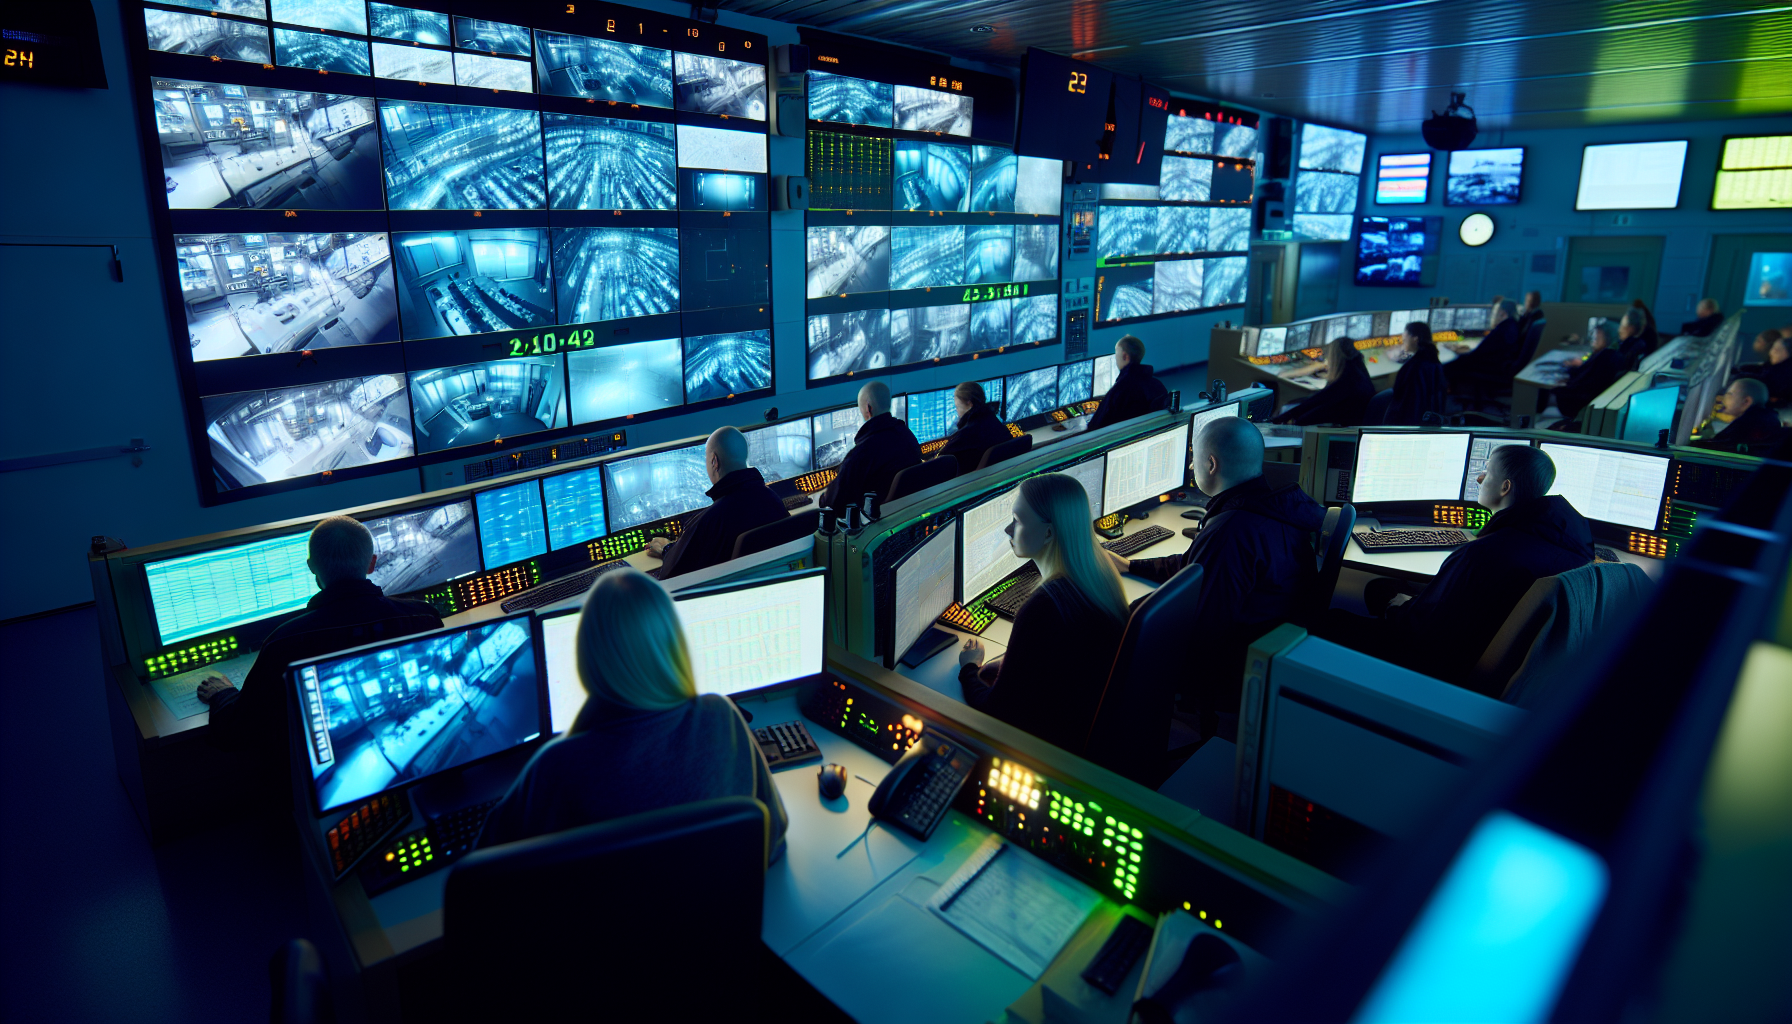 Real-time monitoring control room with video surveillance screens